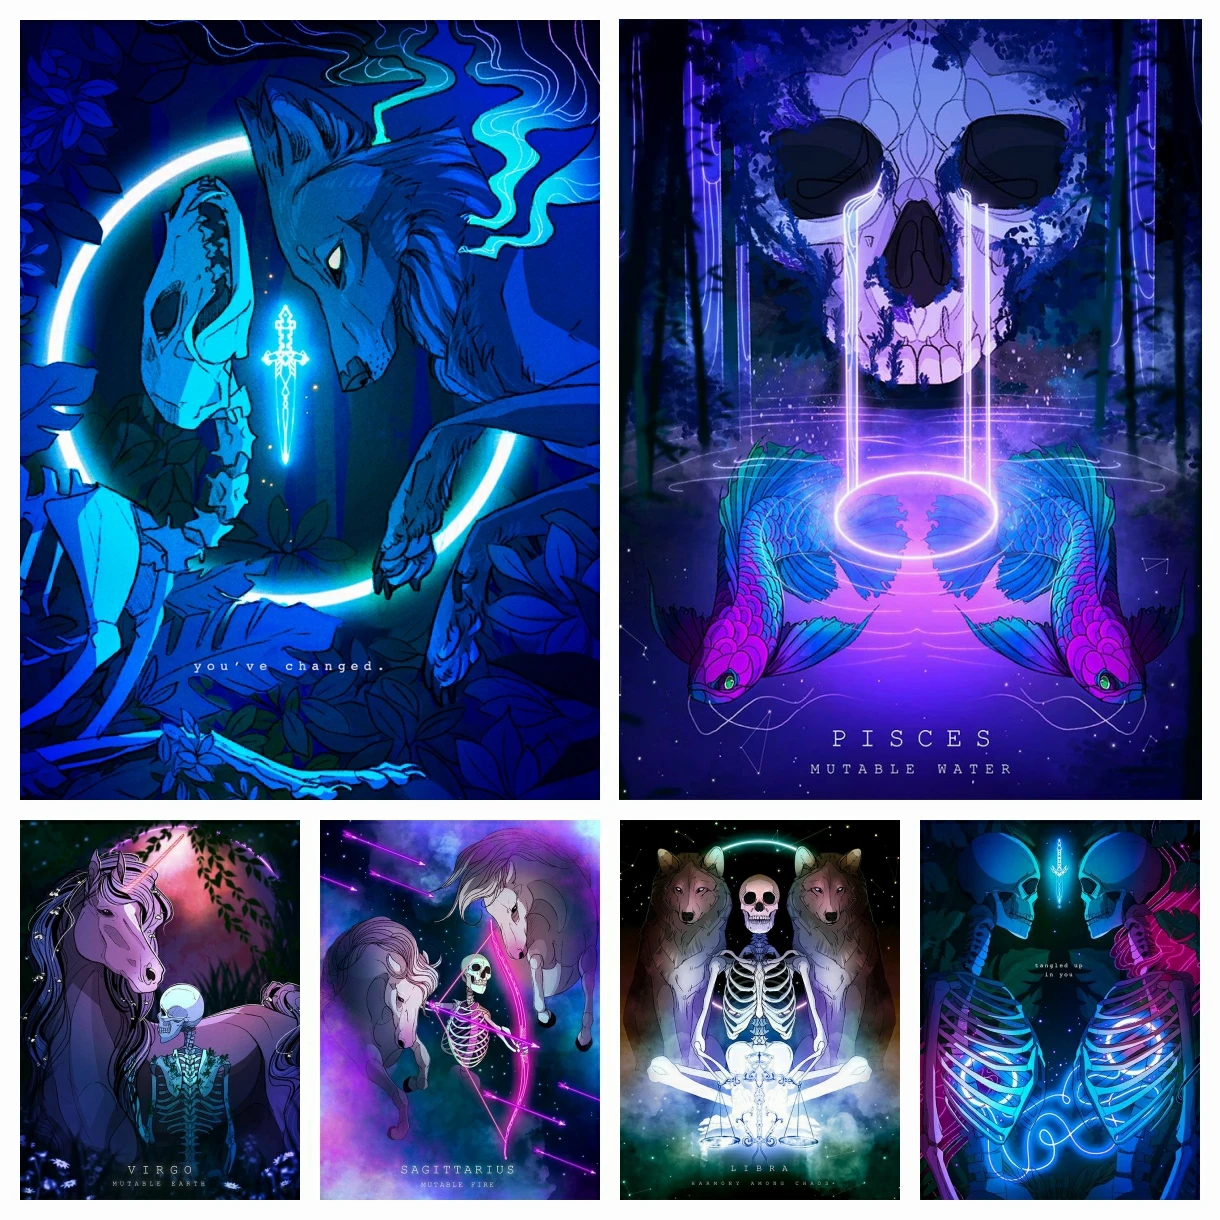 Glowing Astrology Horror Skeletons and Animal 5D DIY Diamond Painting Embroidery Mosaic Cross Stitch Handicraft Art Home Decor